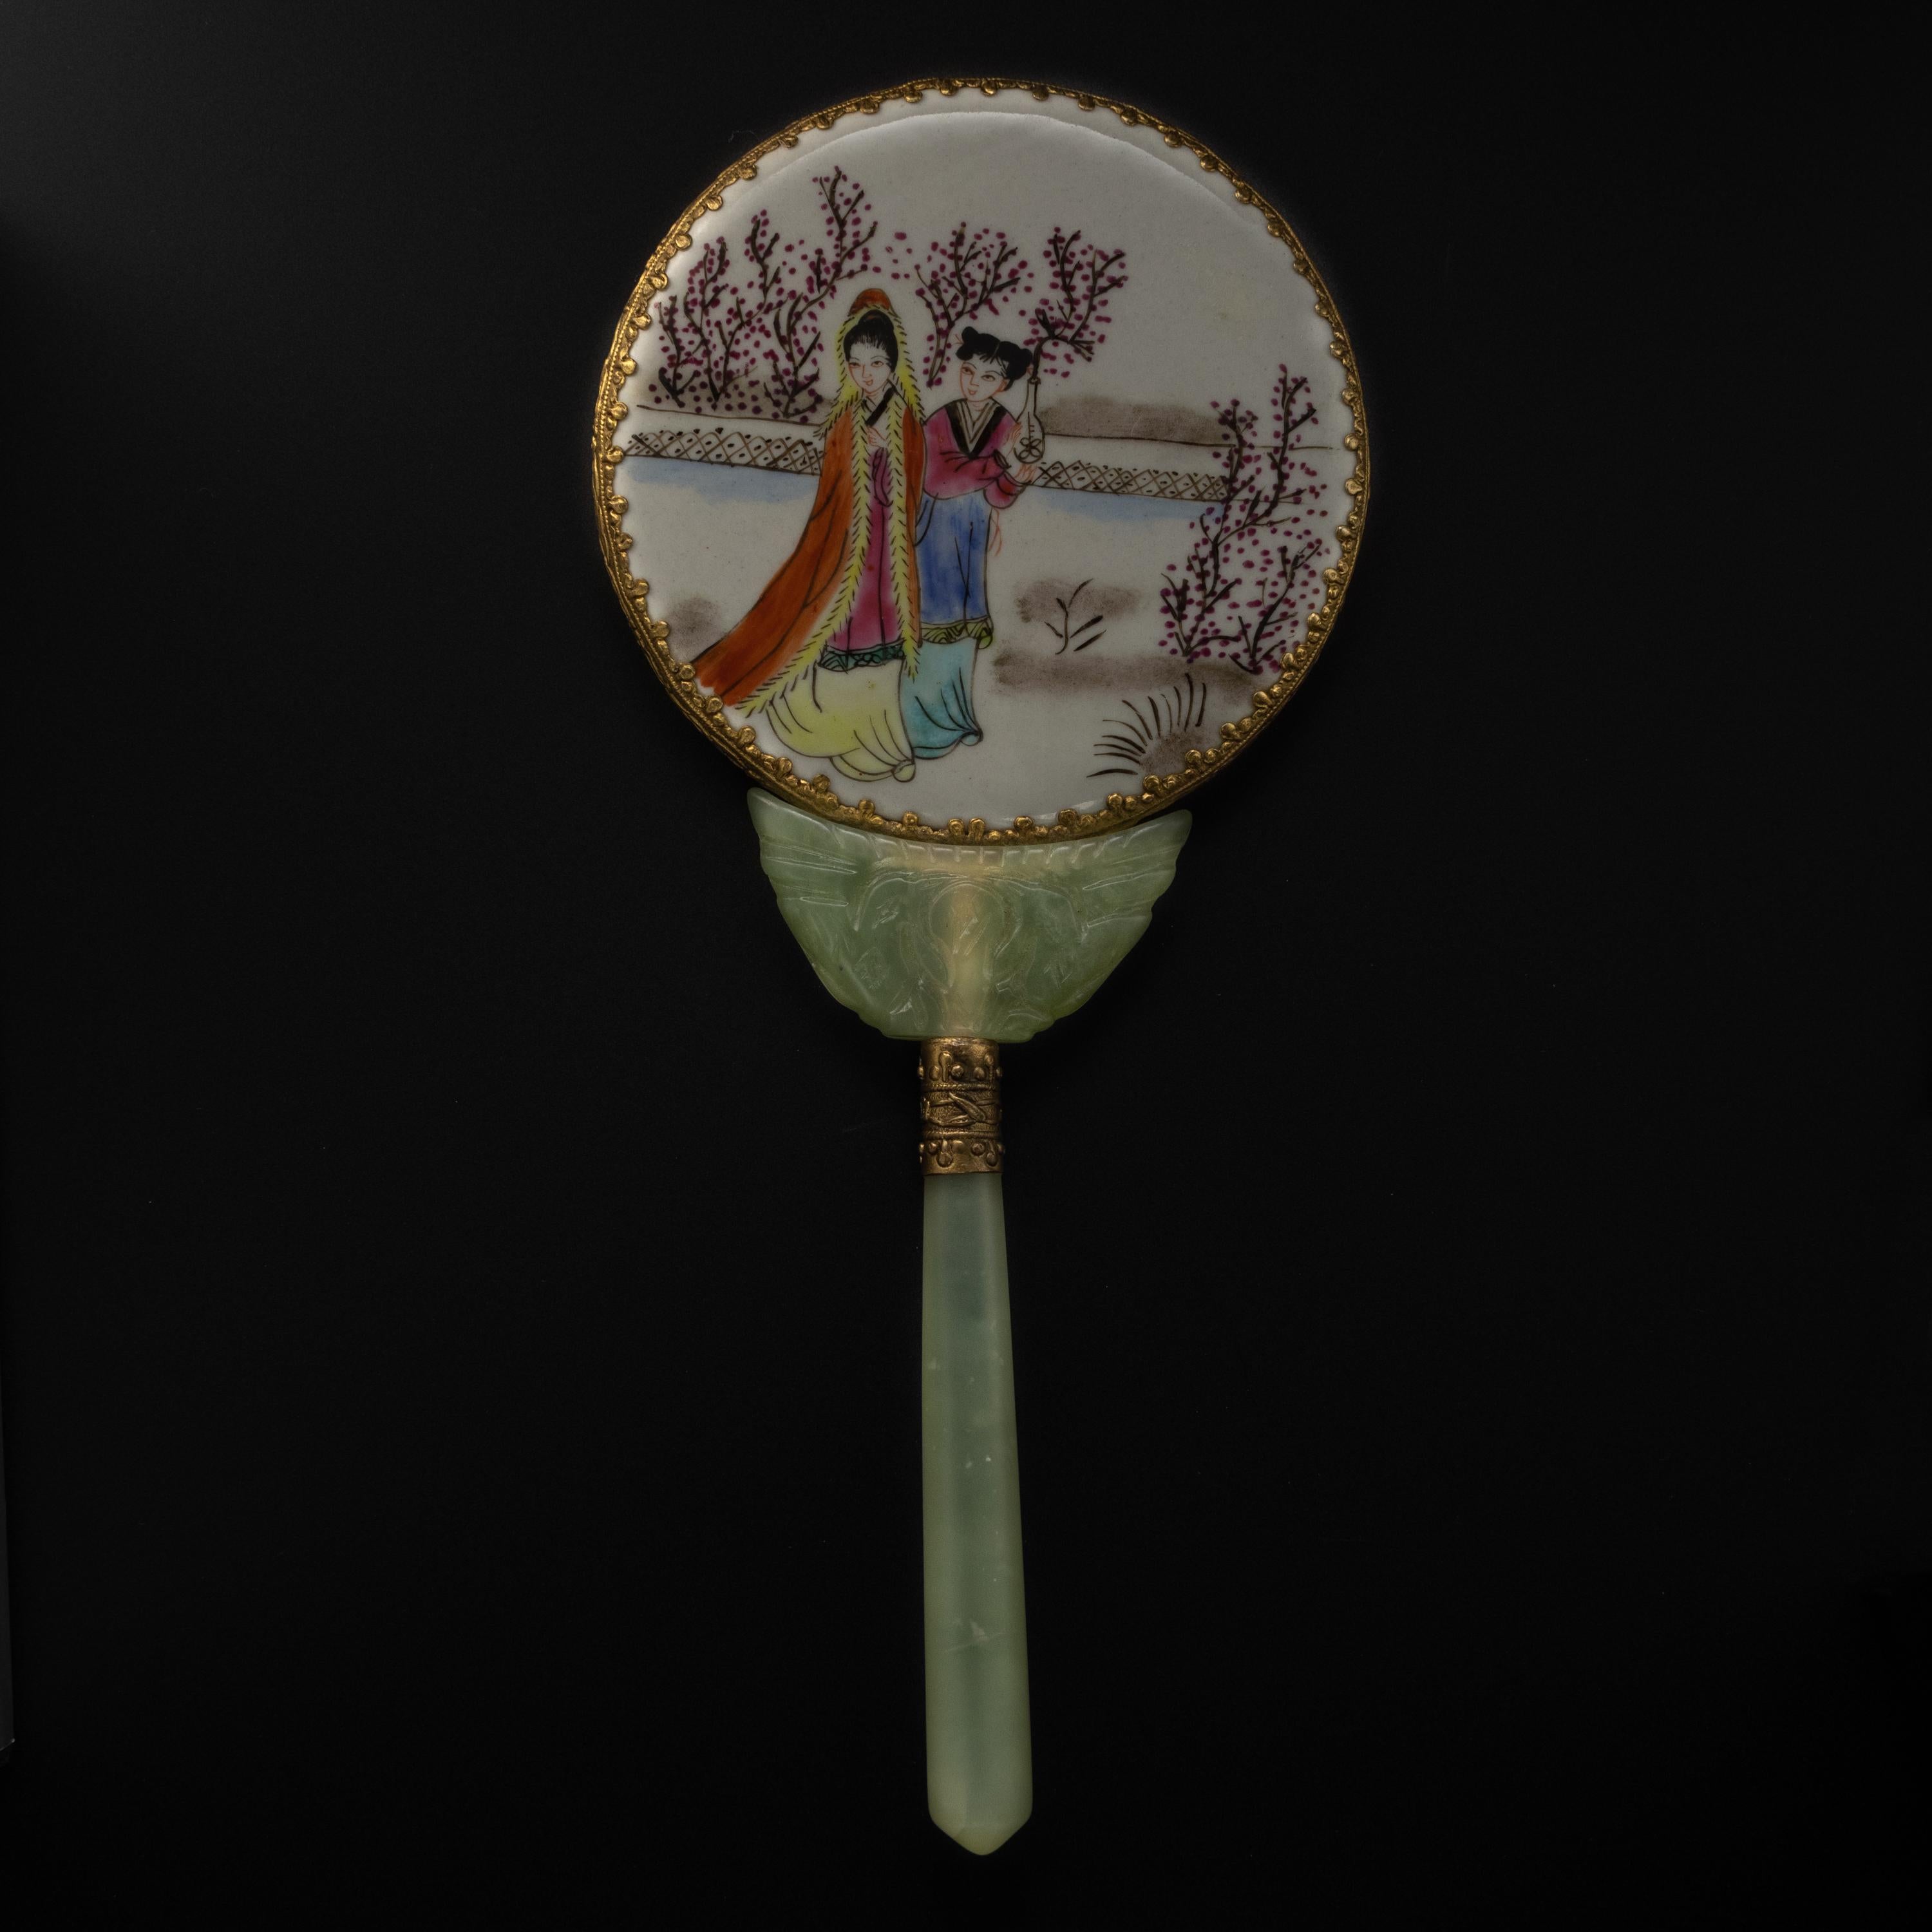 This circa 1910-1920 hand mirror is beautifully made from serpentine -a stone often mistaken for jade. The yellowish-green handle supports a fine porcelain backing which has been delicately hand-painted. The mirror is framed in ornate ormolu. The